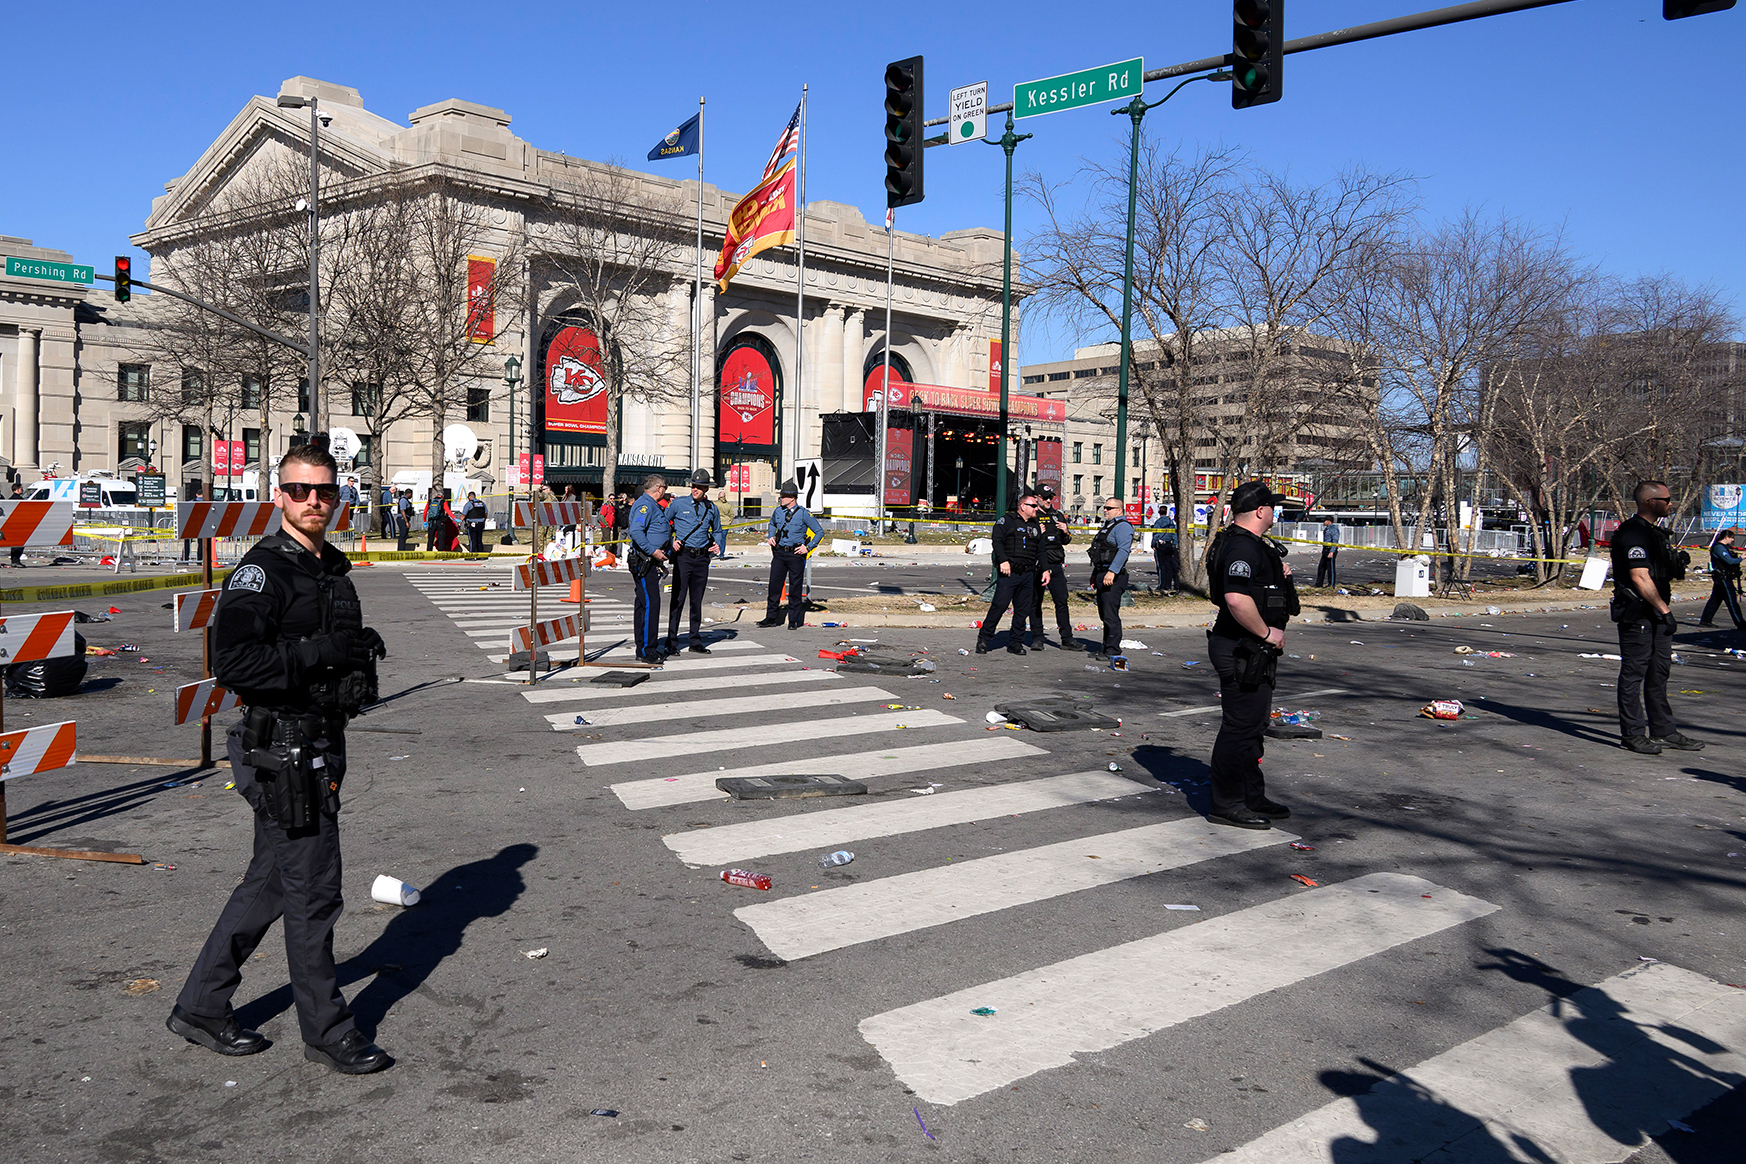 Police cordon off the area around Union Station following the shooting in Kansas City, Missouri, on February 14. 